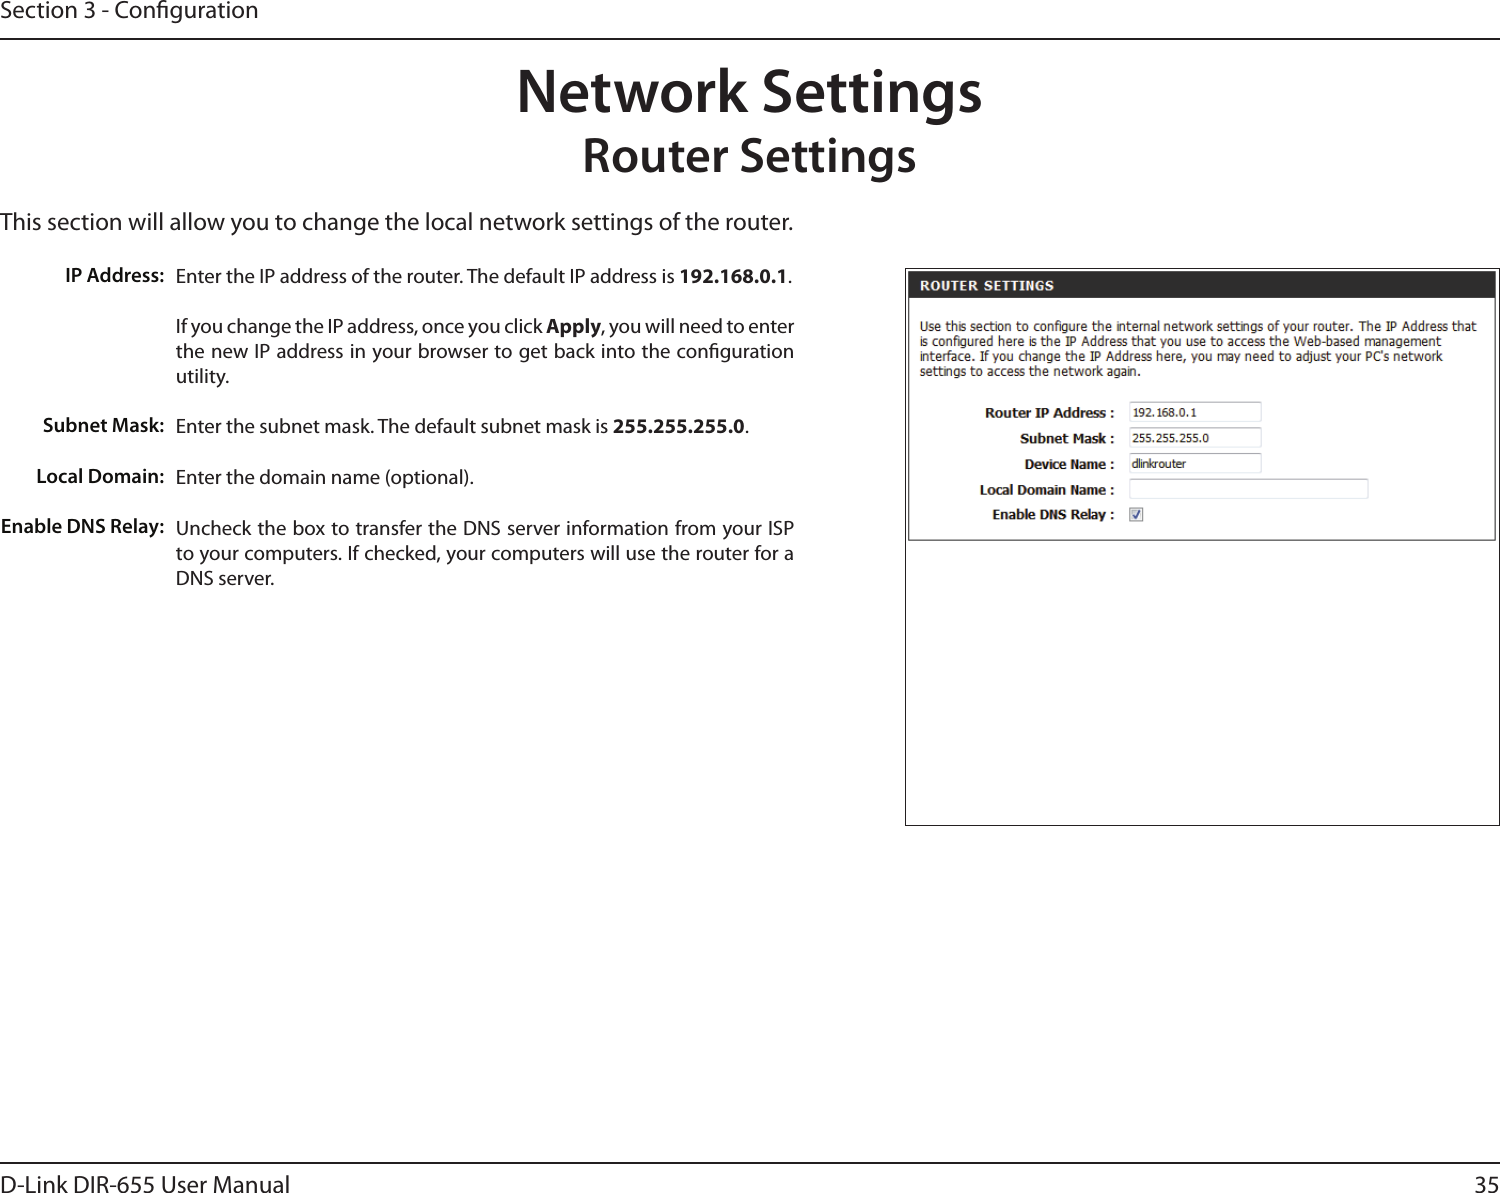 35D-Link DIR-655 User ManualSection 3 - CongurationThis section will allow you to change the local network settings of the router.Network SettingsRouter SettingsEnter the IP address of the router. The default IP address is 192.168.0.1.If you change the IP address, once you click Apply, you will need to enter the new IP address in your browser to get back into the conguration utility.Enter the subnet mask. The default subnet mask is 255.255.255.0.Enter the domain name (optional).Uncheck the box to transfer the DNS server information from your ISP to your computers. If checked, your computers will use the router for a DNS server.IP Address:Subnet Mask:Local Domain:Enable DNS Relay: